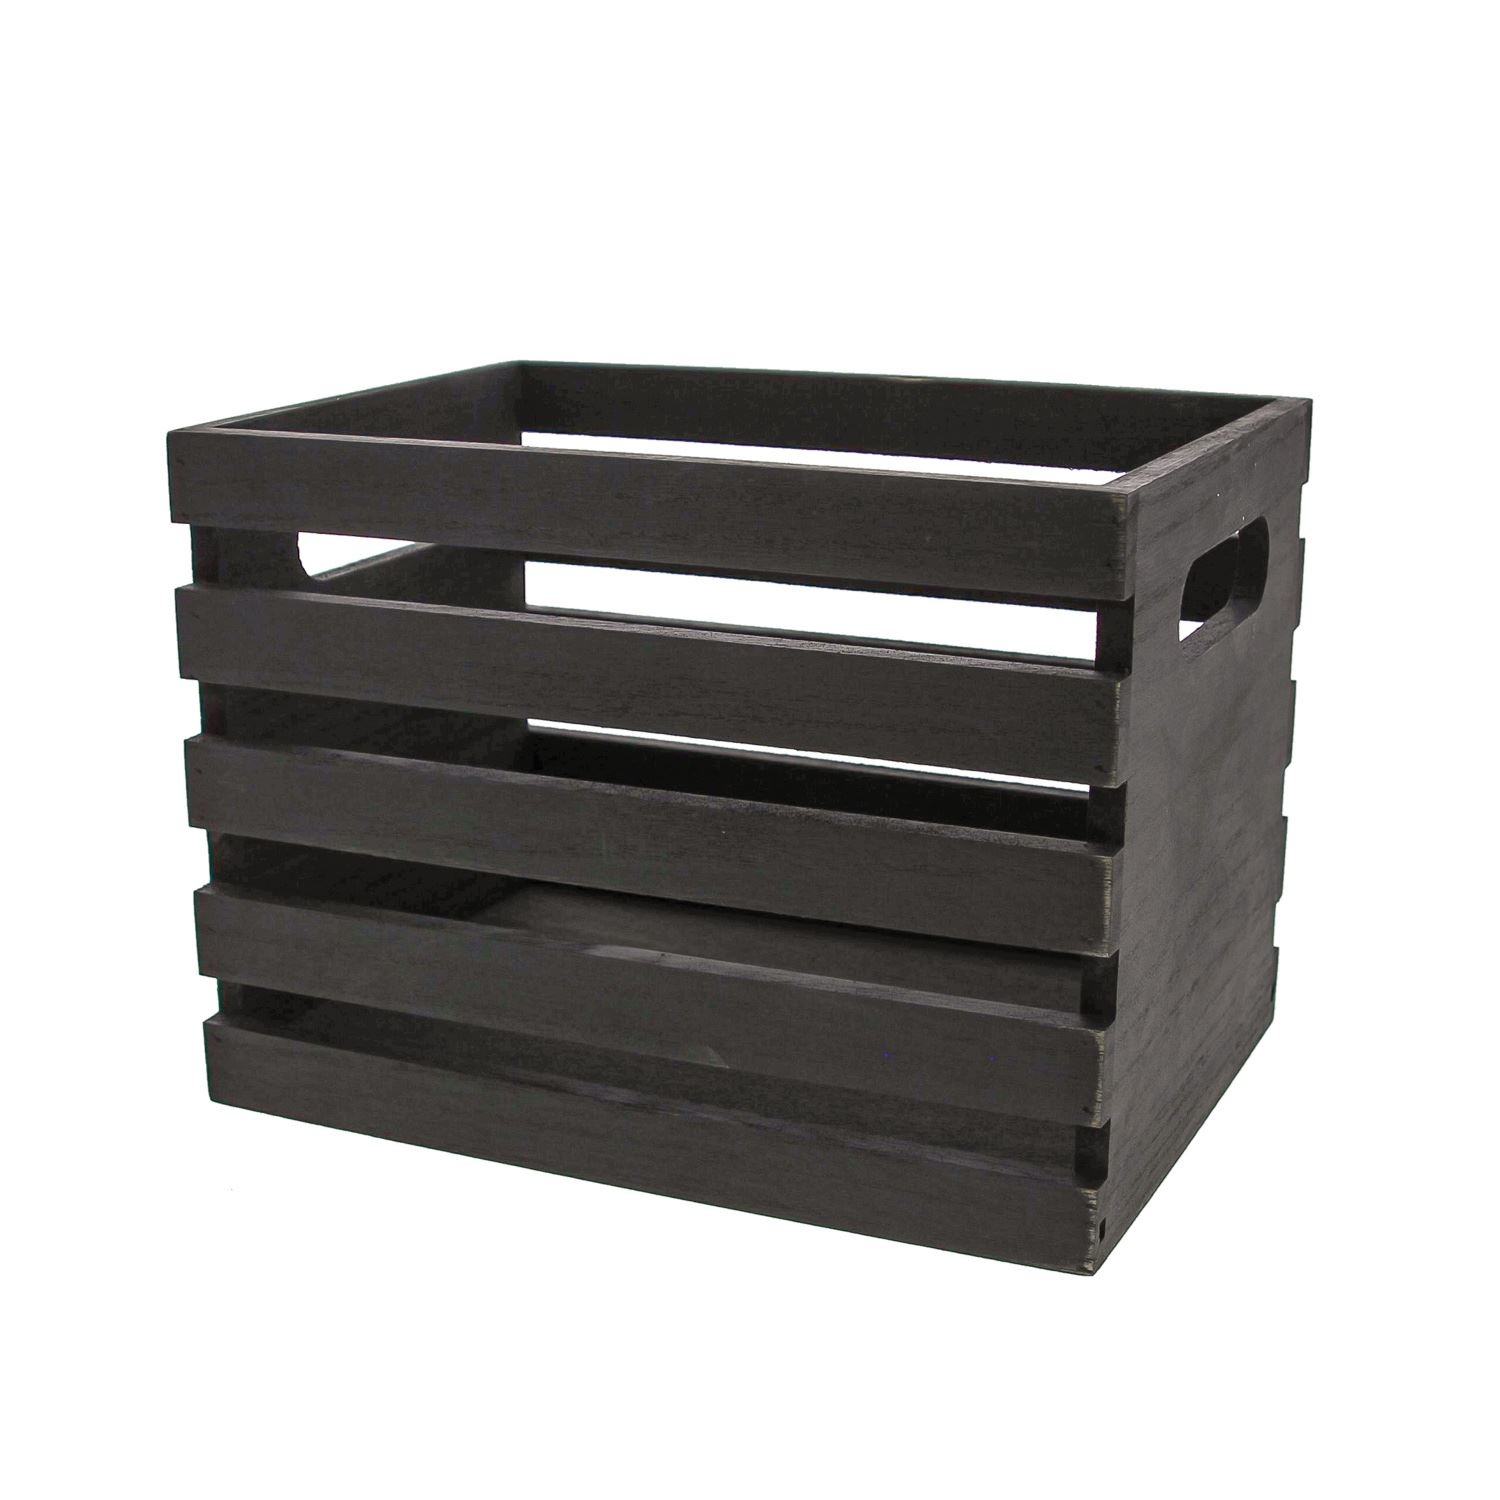 Black Crate for 6 bottles - 205*145*150mm - 5 pieces